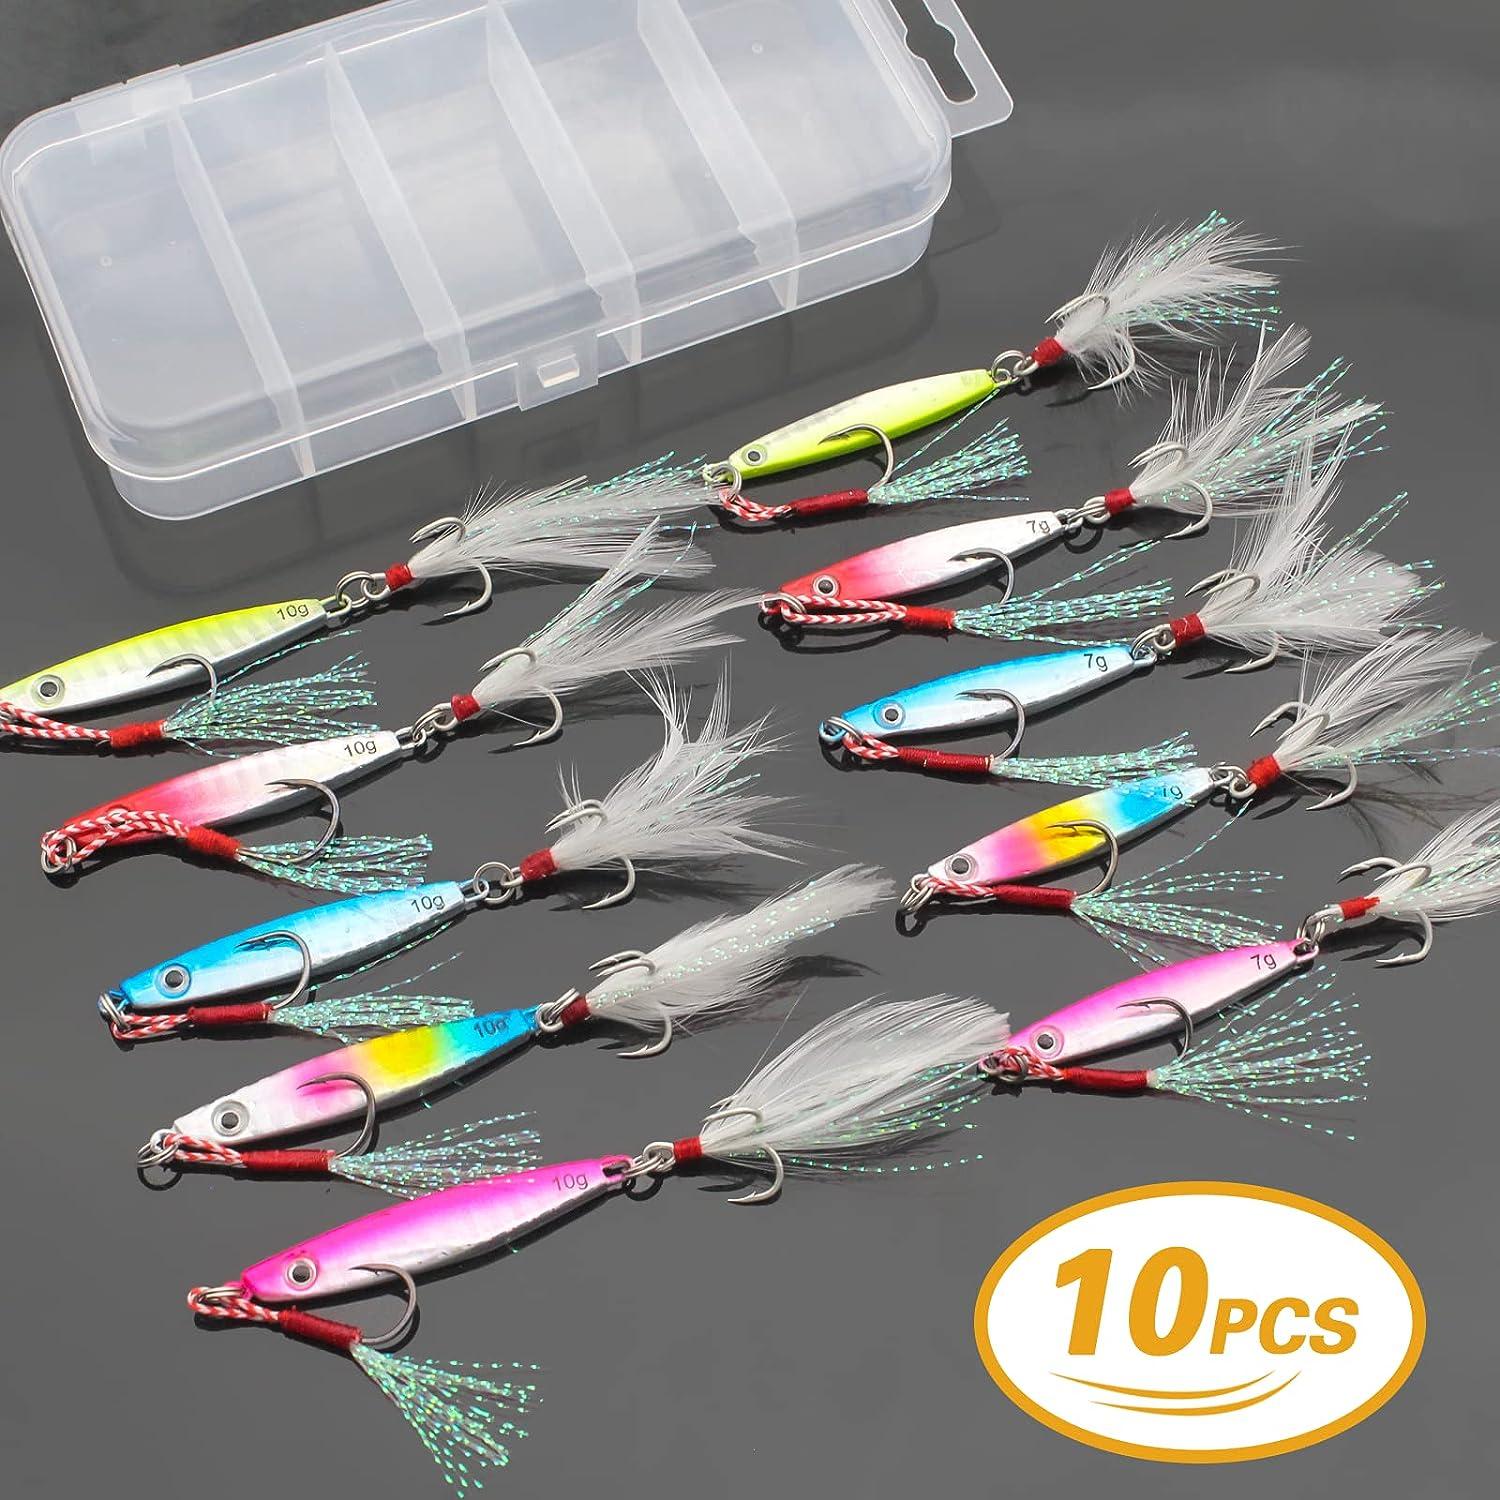 YONGZHI Fishing Lures Metal VIB Hard Spinner Blade Baits with Feathers  Treble Hooks for Bass Walleyes Trout Fishing Spoons